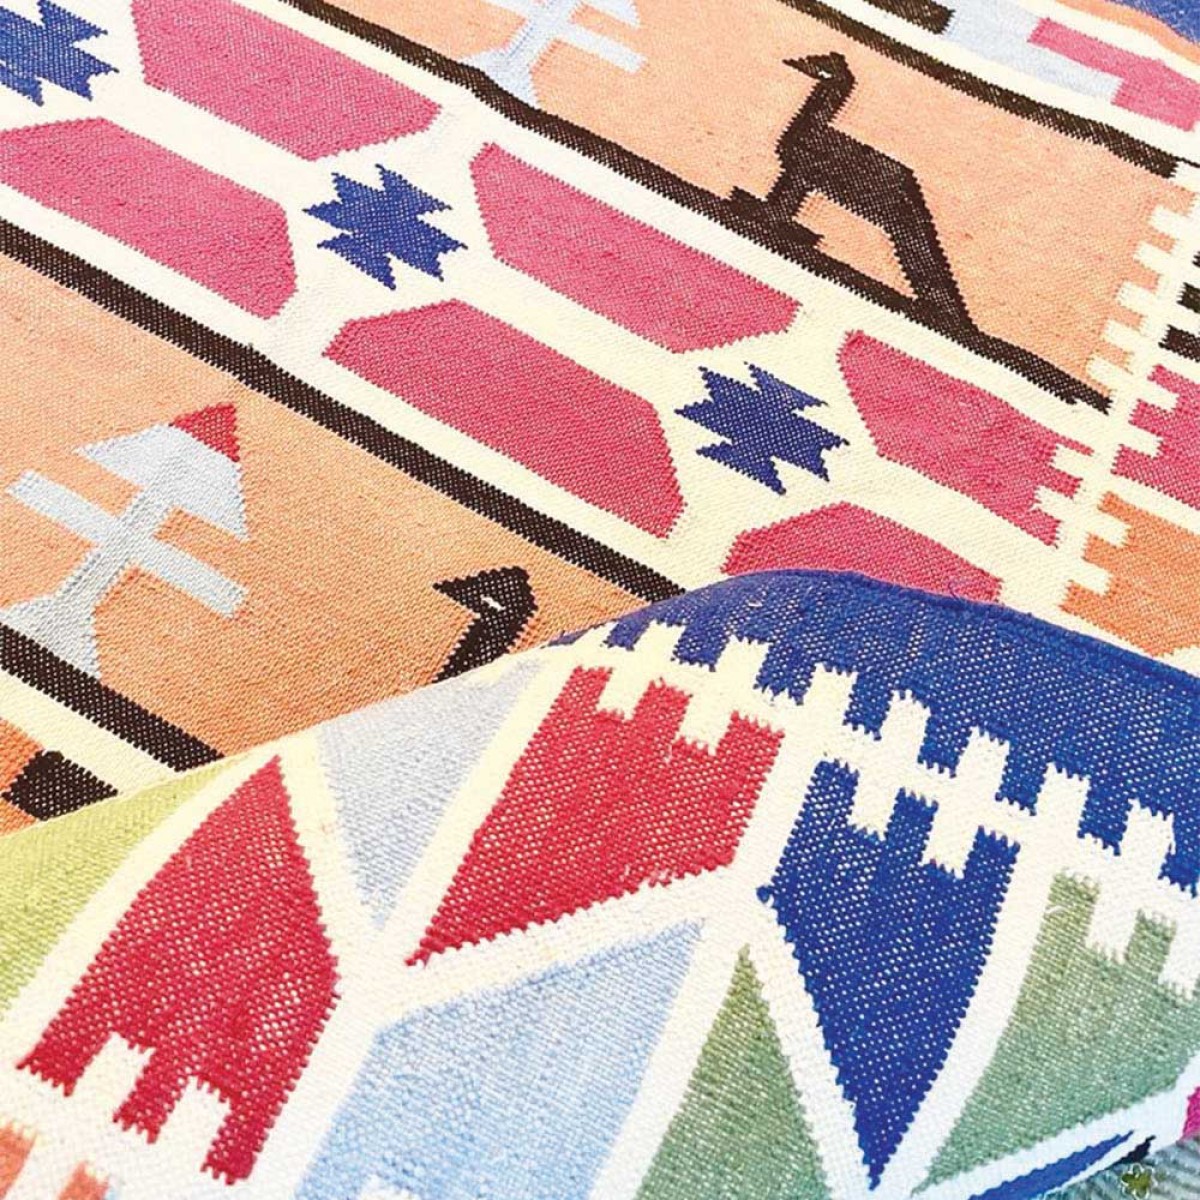 Cotton Floor Rugs - Multi Color (Made to Order)